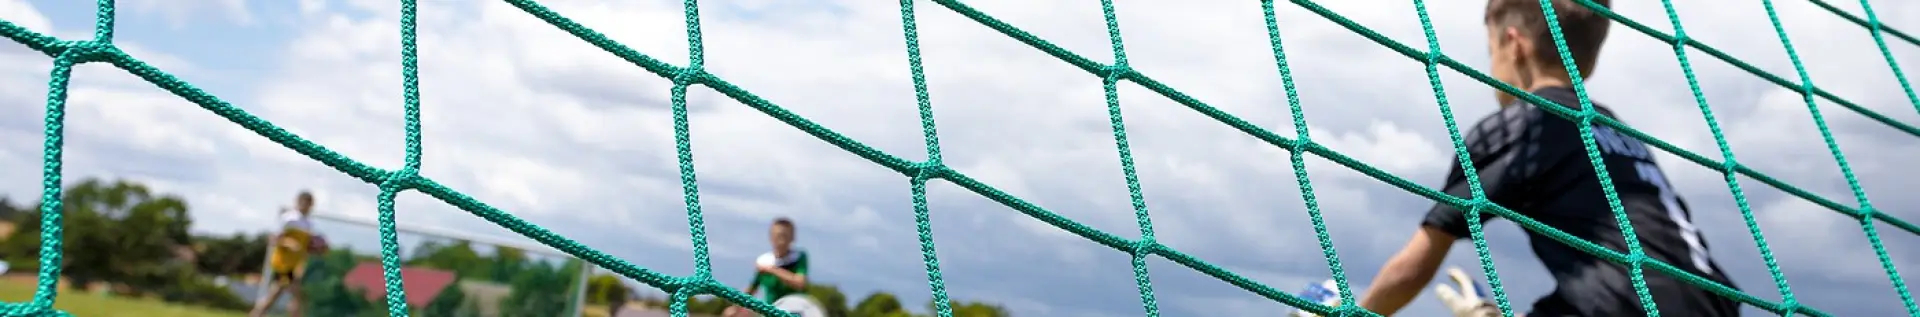 Fence net for rugby courts - Cod. RURE0303